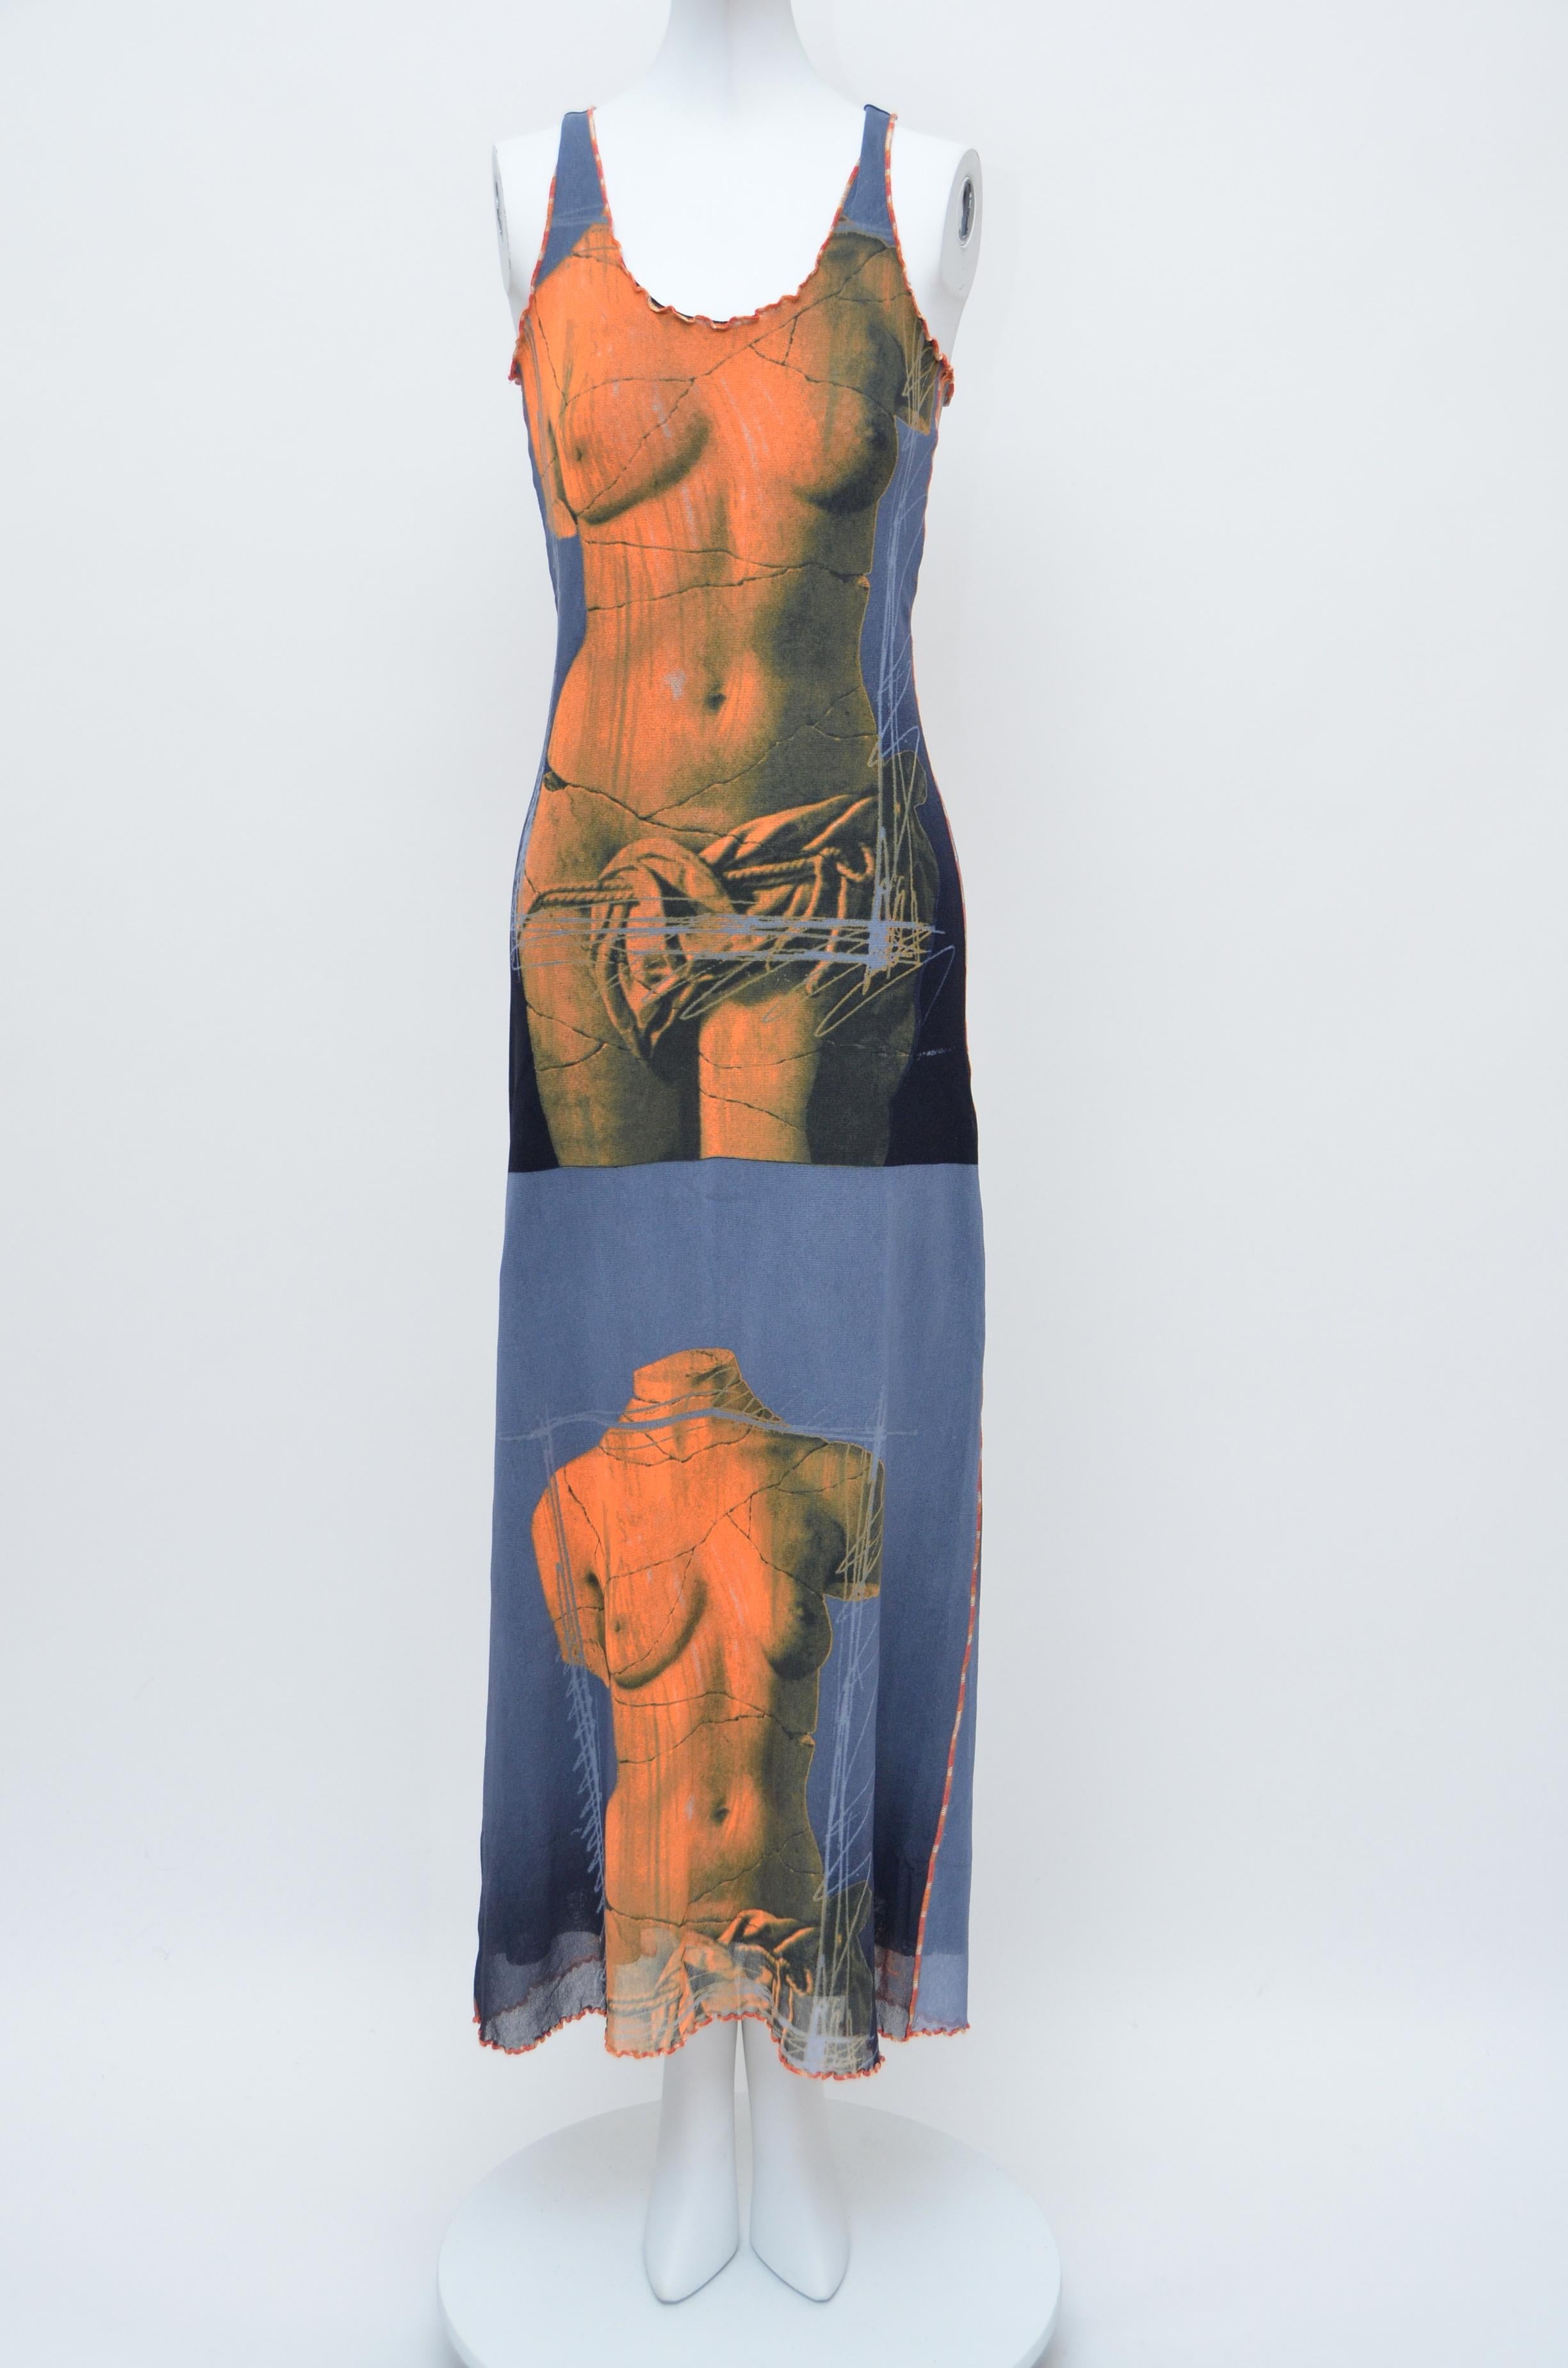 Jean Paul Gaultier Dress with naked body print image.
Size S.
Excellent mint condition.

FINAL SALE.